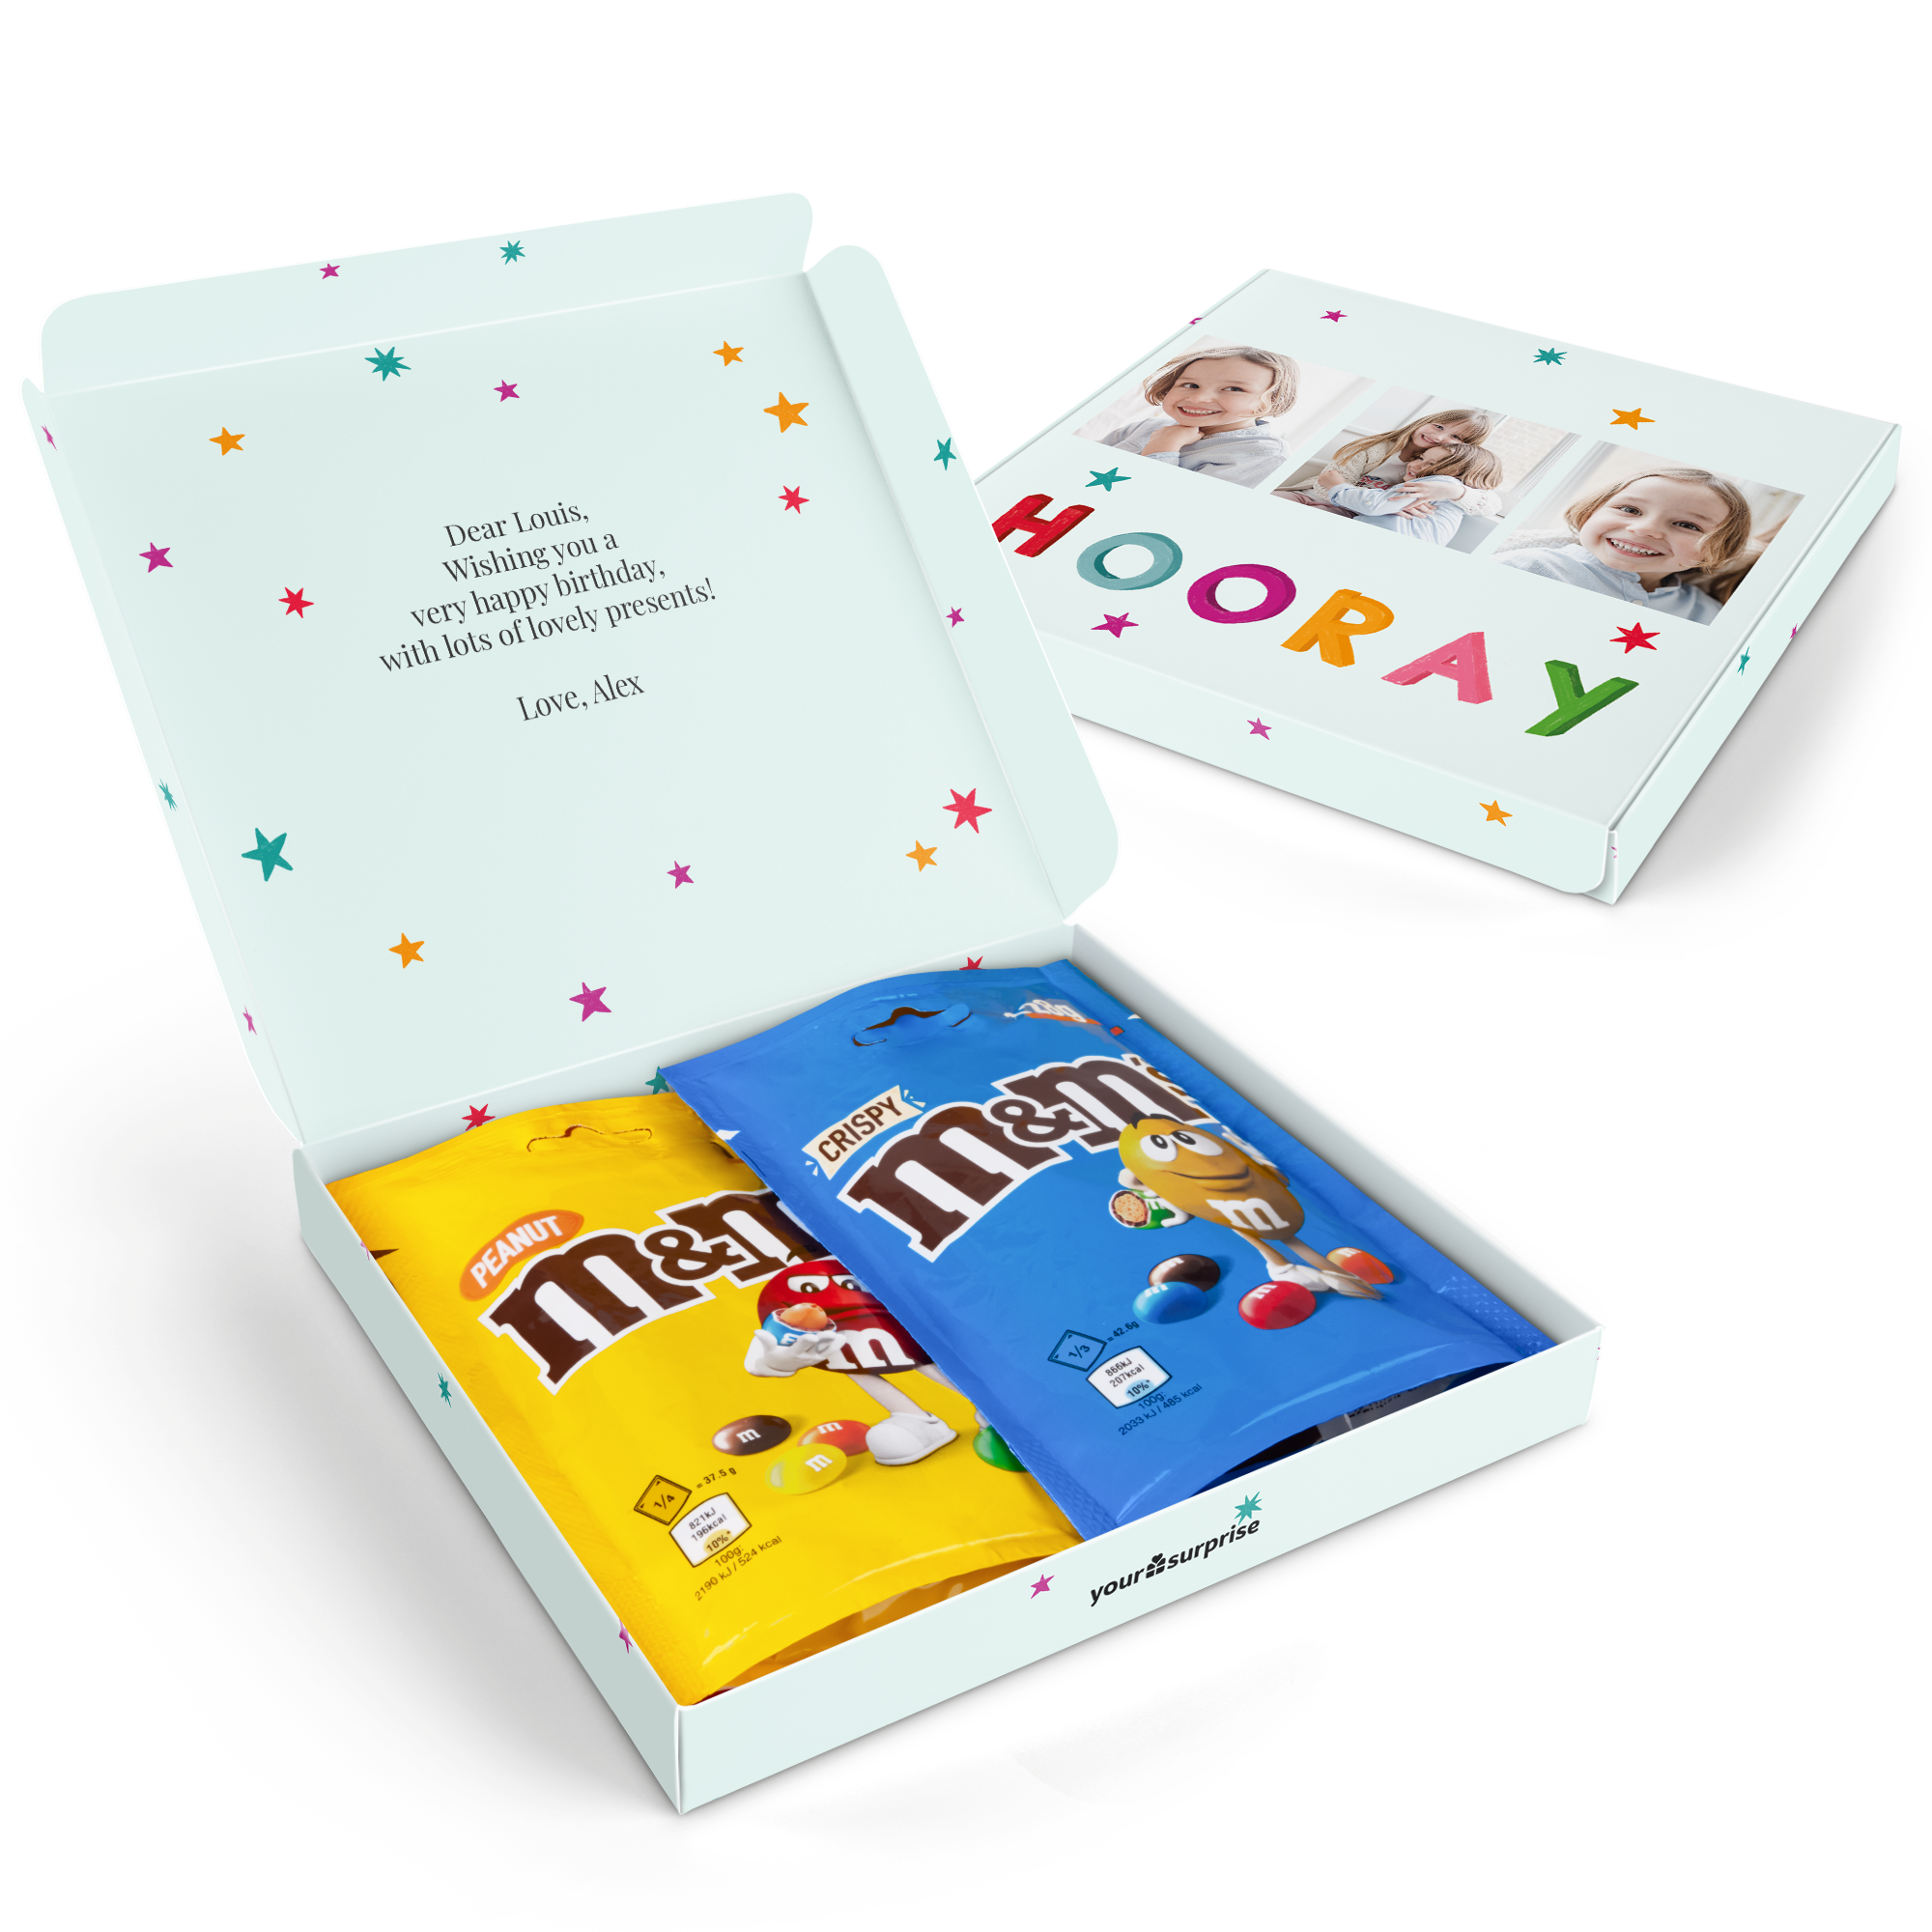 Personalised M&M's gift box - General - 2 bags